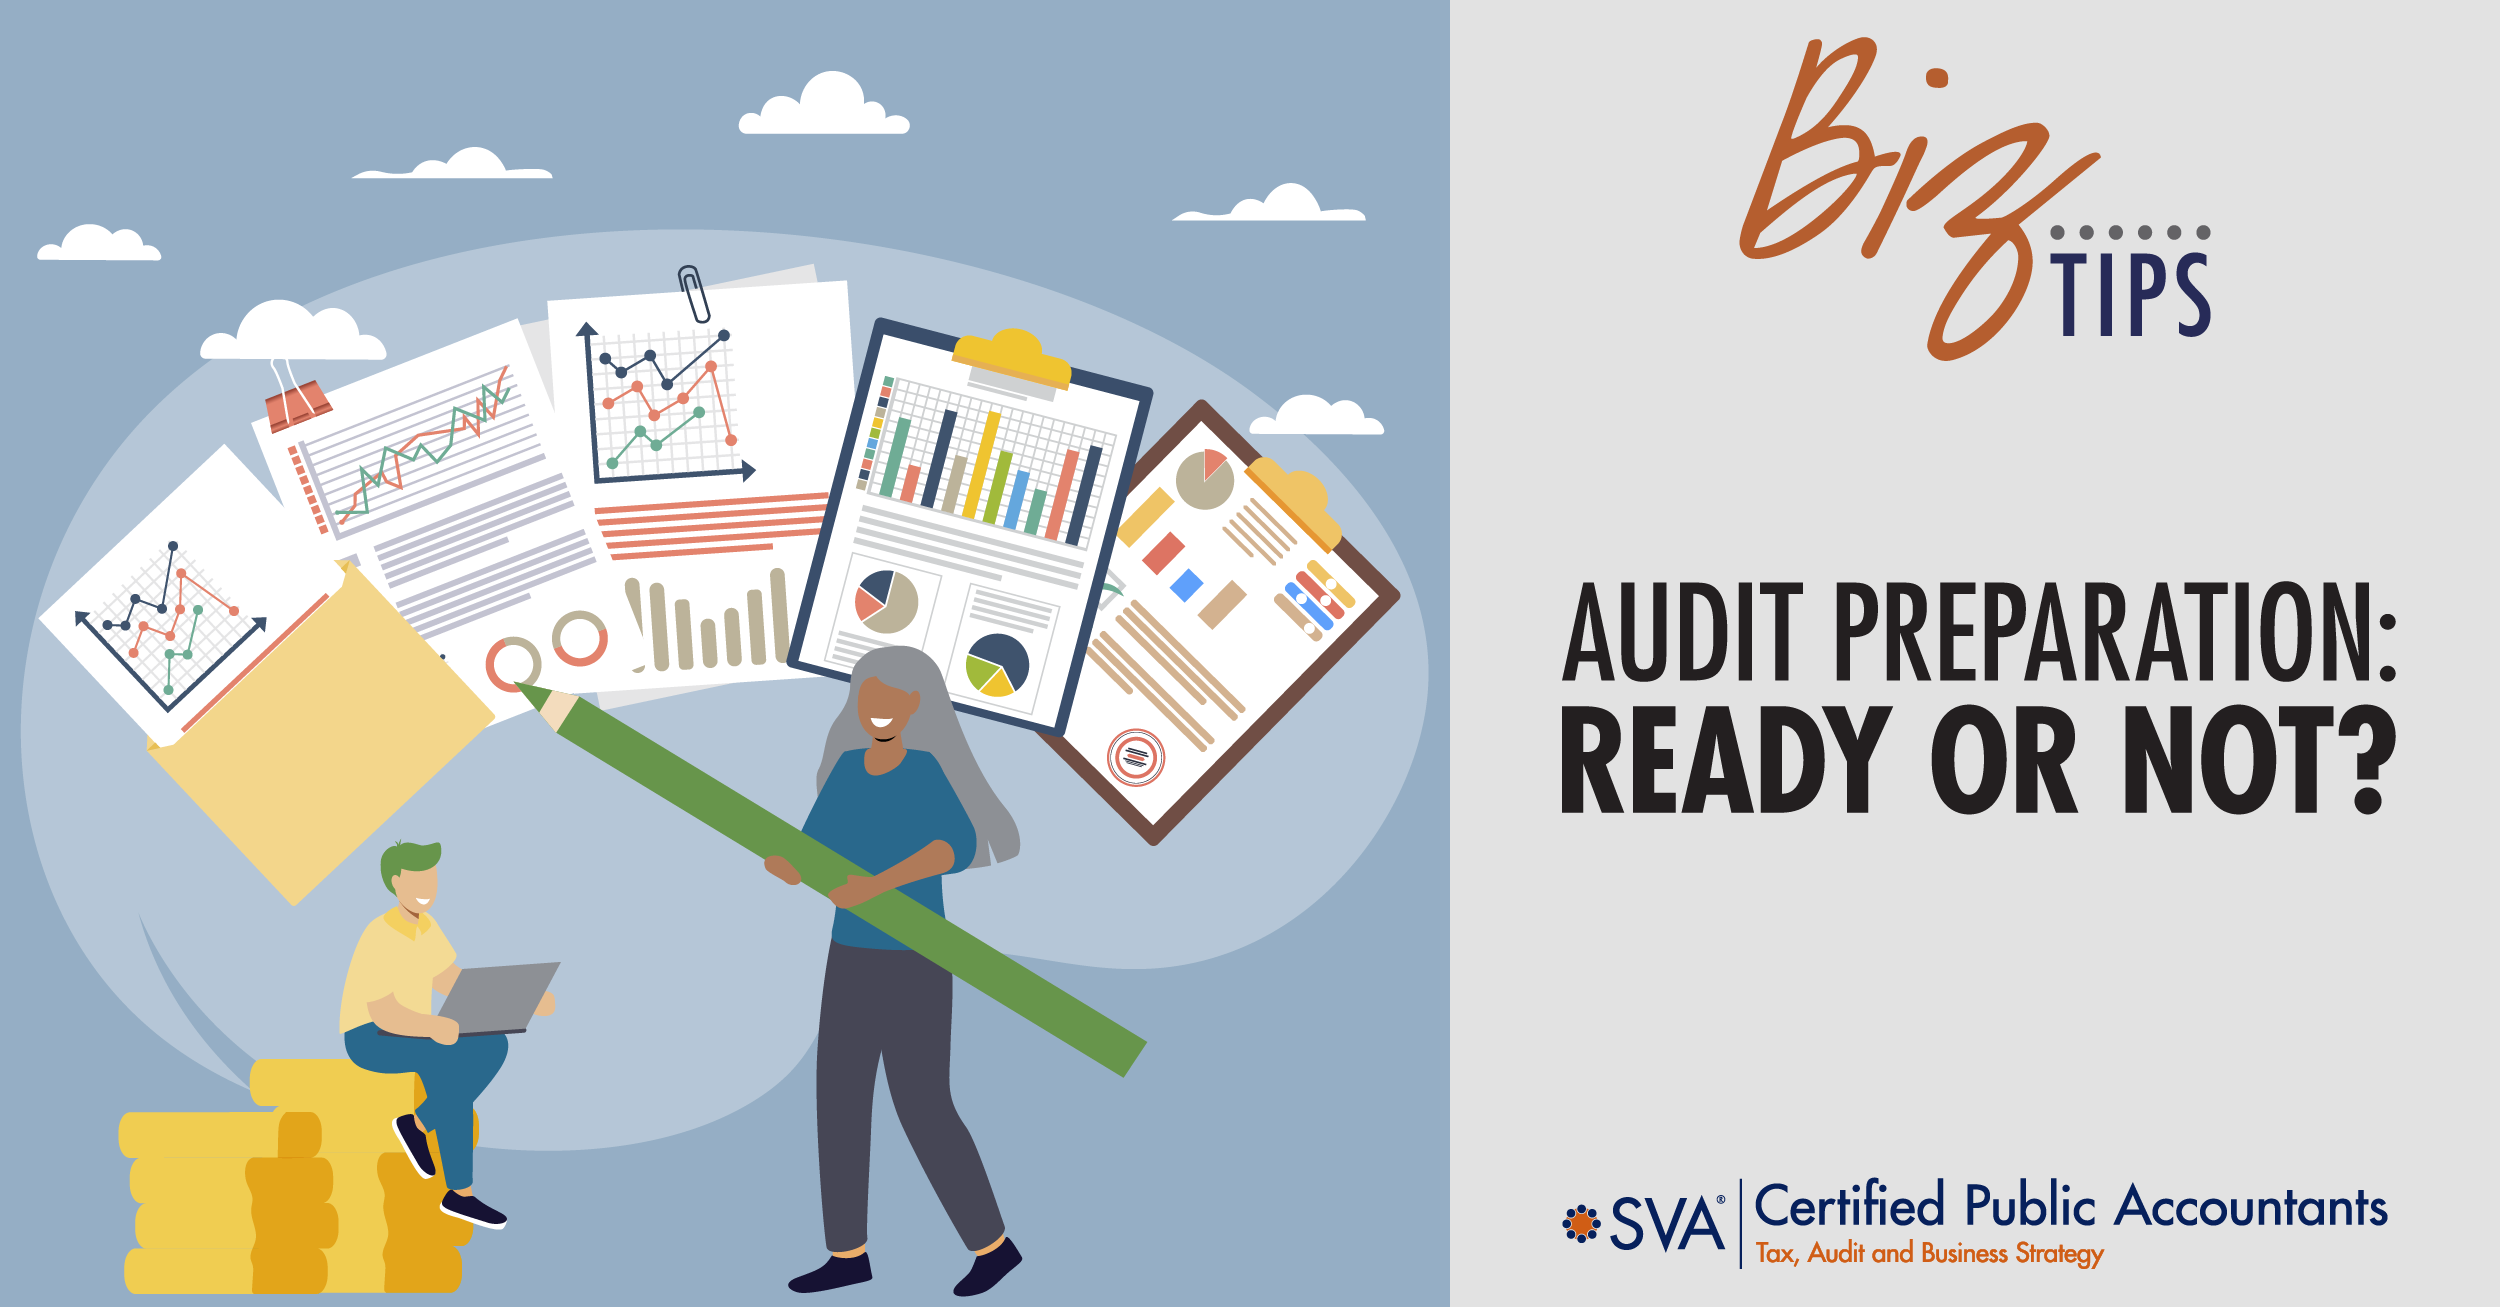 Audit Preparation: Ready or Not?